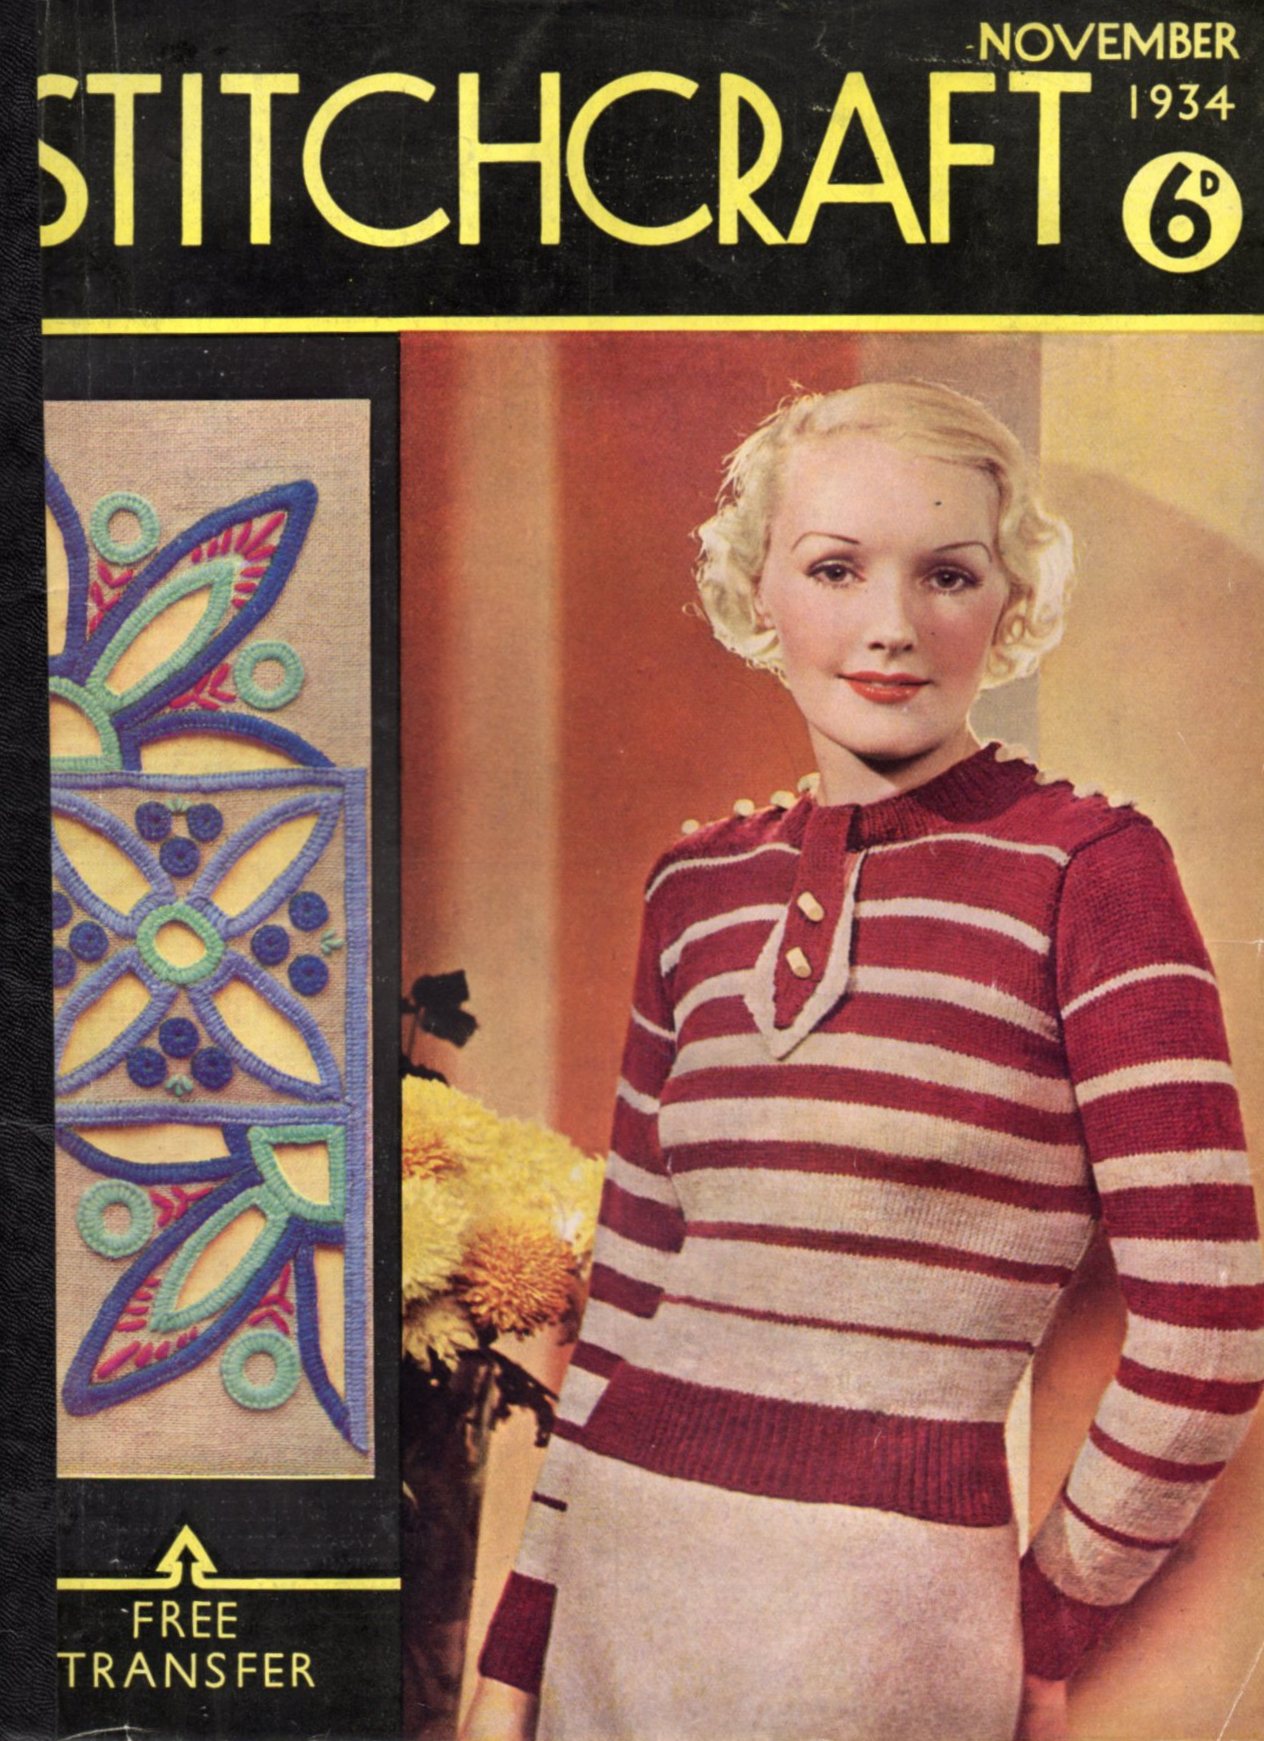 Cover of Stitchcraft November 1944 showing lady wearing horizontally striped pullover in fawn and dark red stripes and mock necktie and buttons on the shoulders.